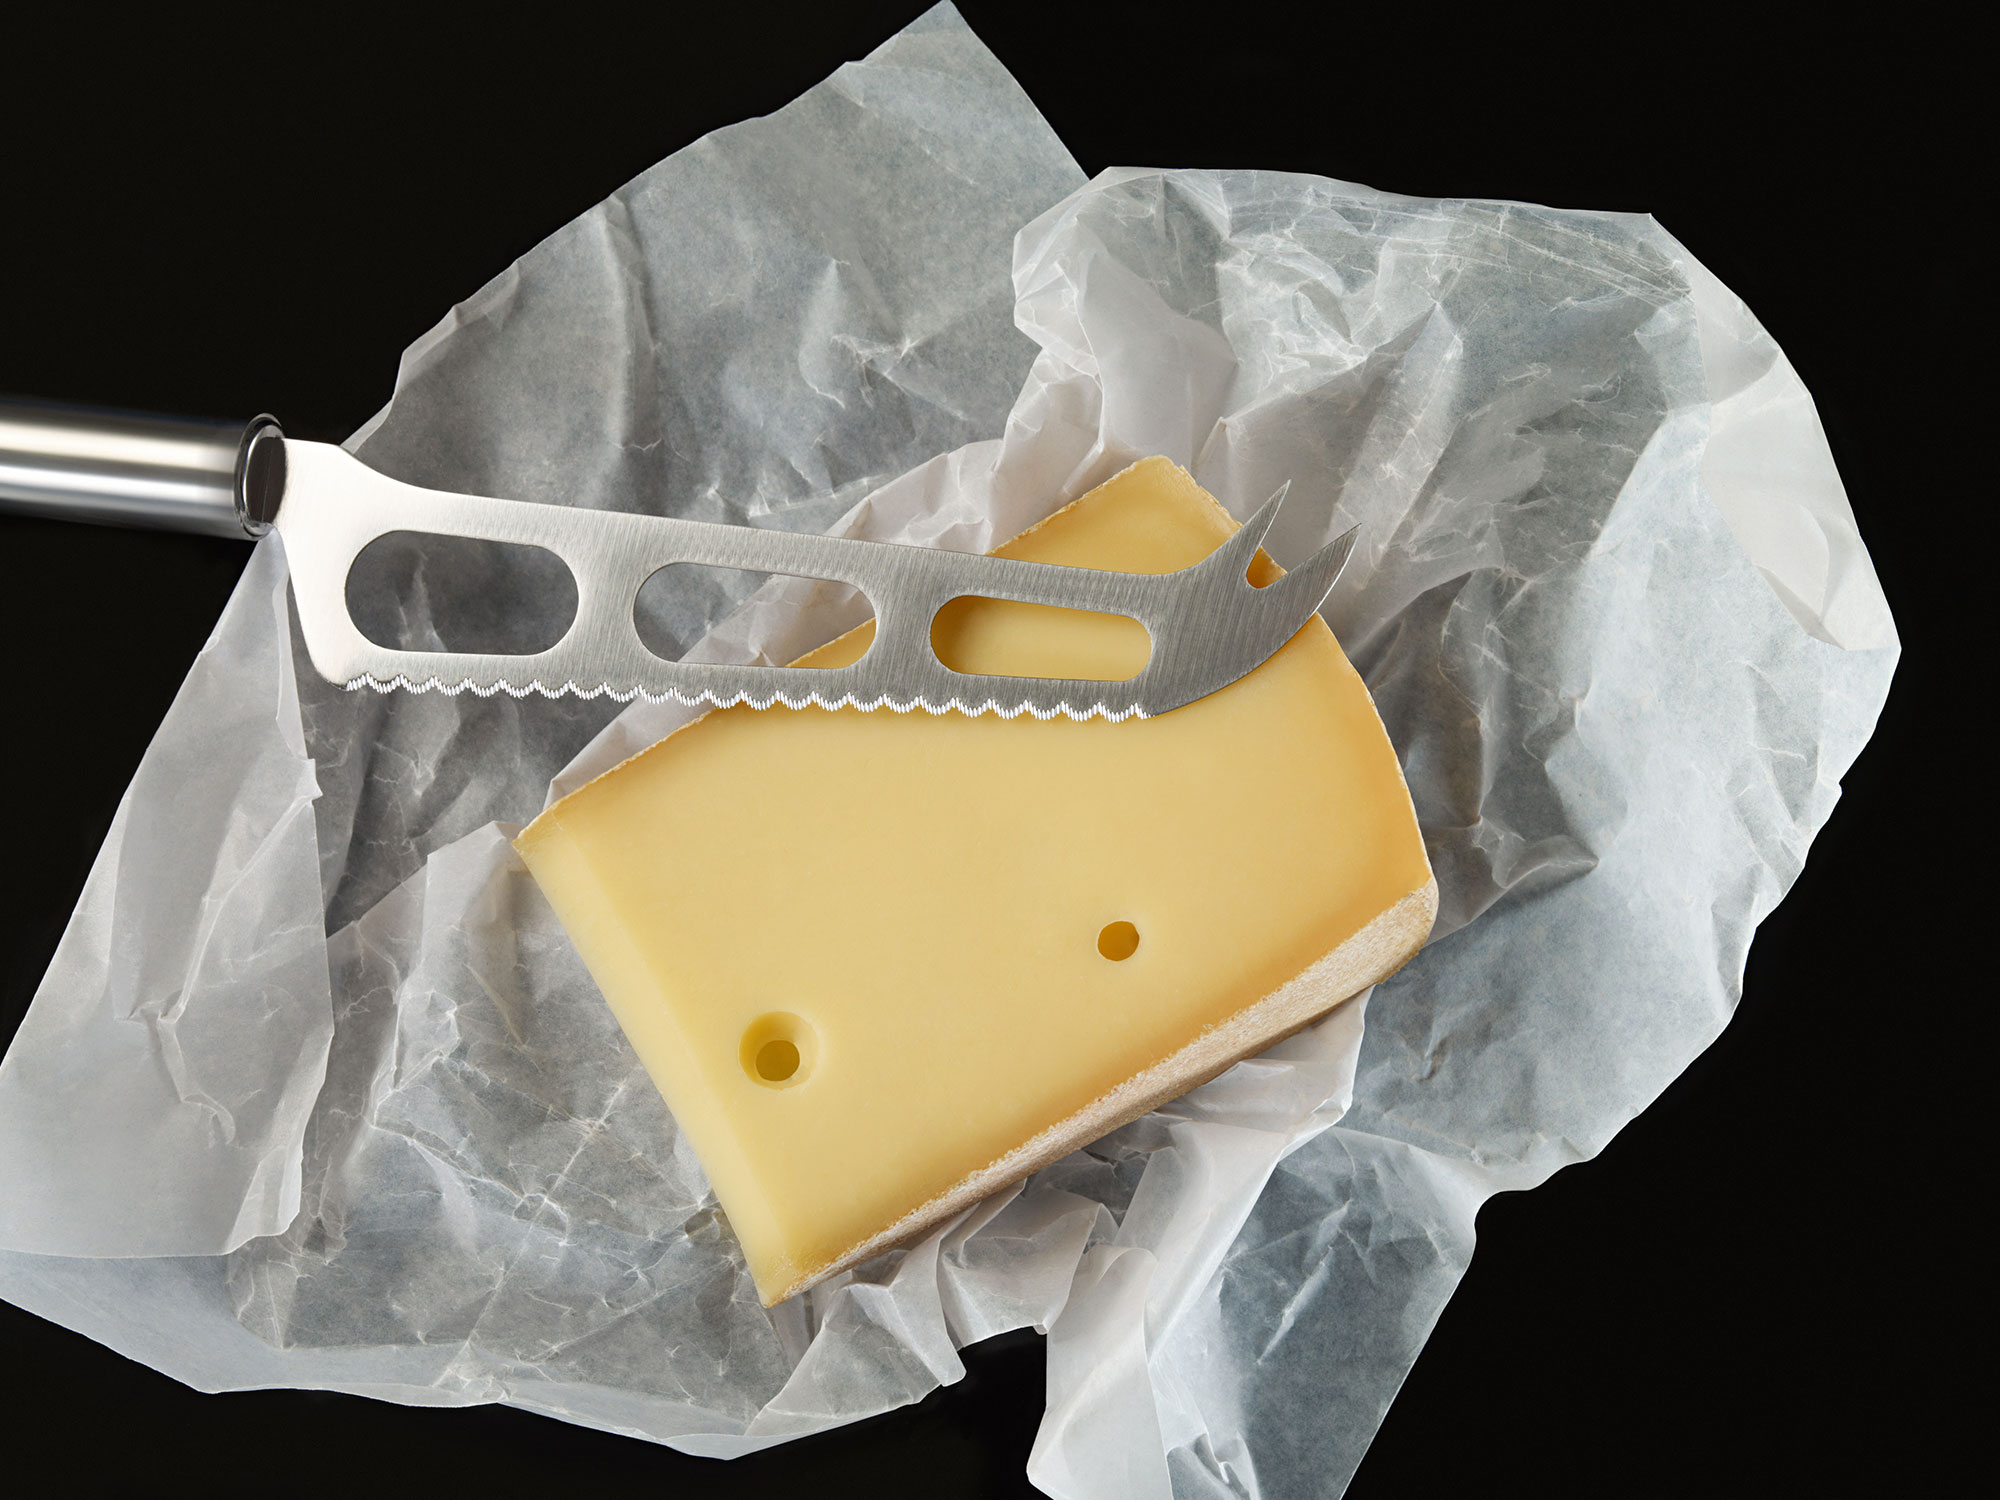 https://static.onecms.io/wp-content/uploads/sites/19/2018/07/23/cheese-knives.jpg